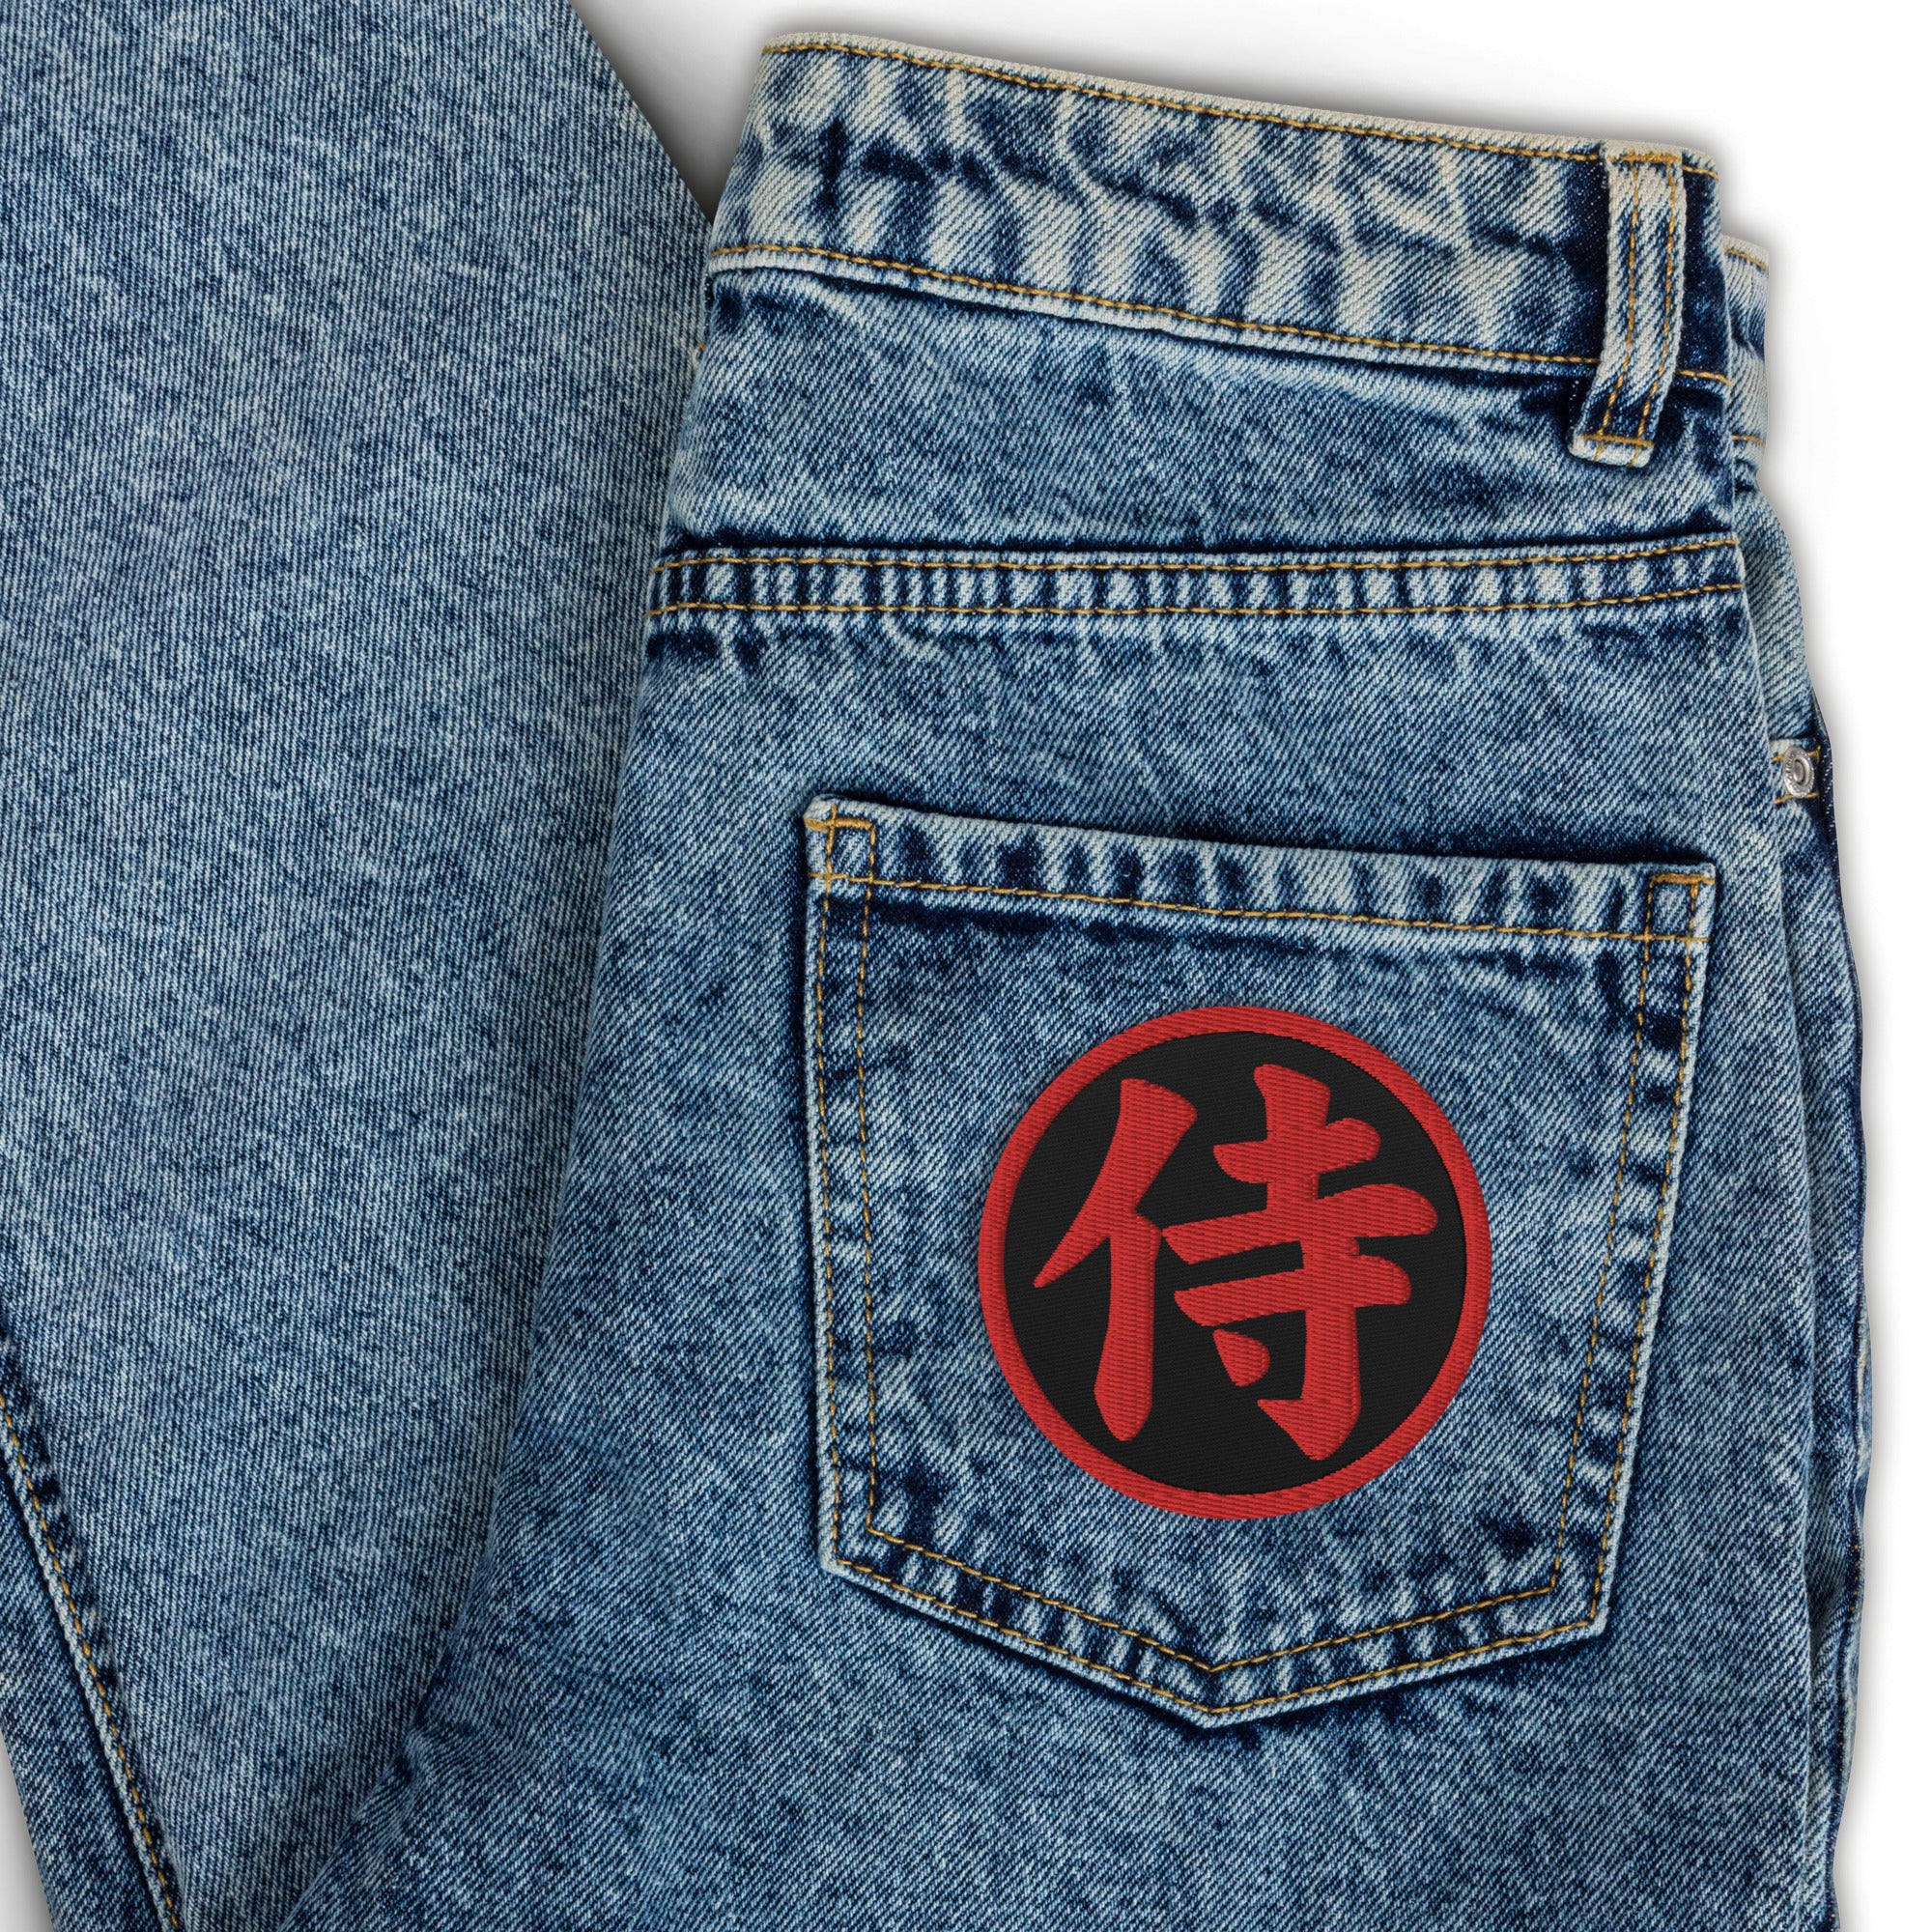 Samurai The Japanese Kanji Symbol Embroidered Patch Red Thread Patches - Edge of Life Designs